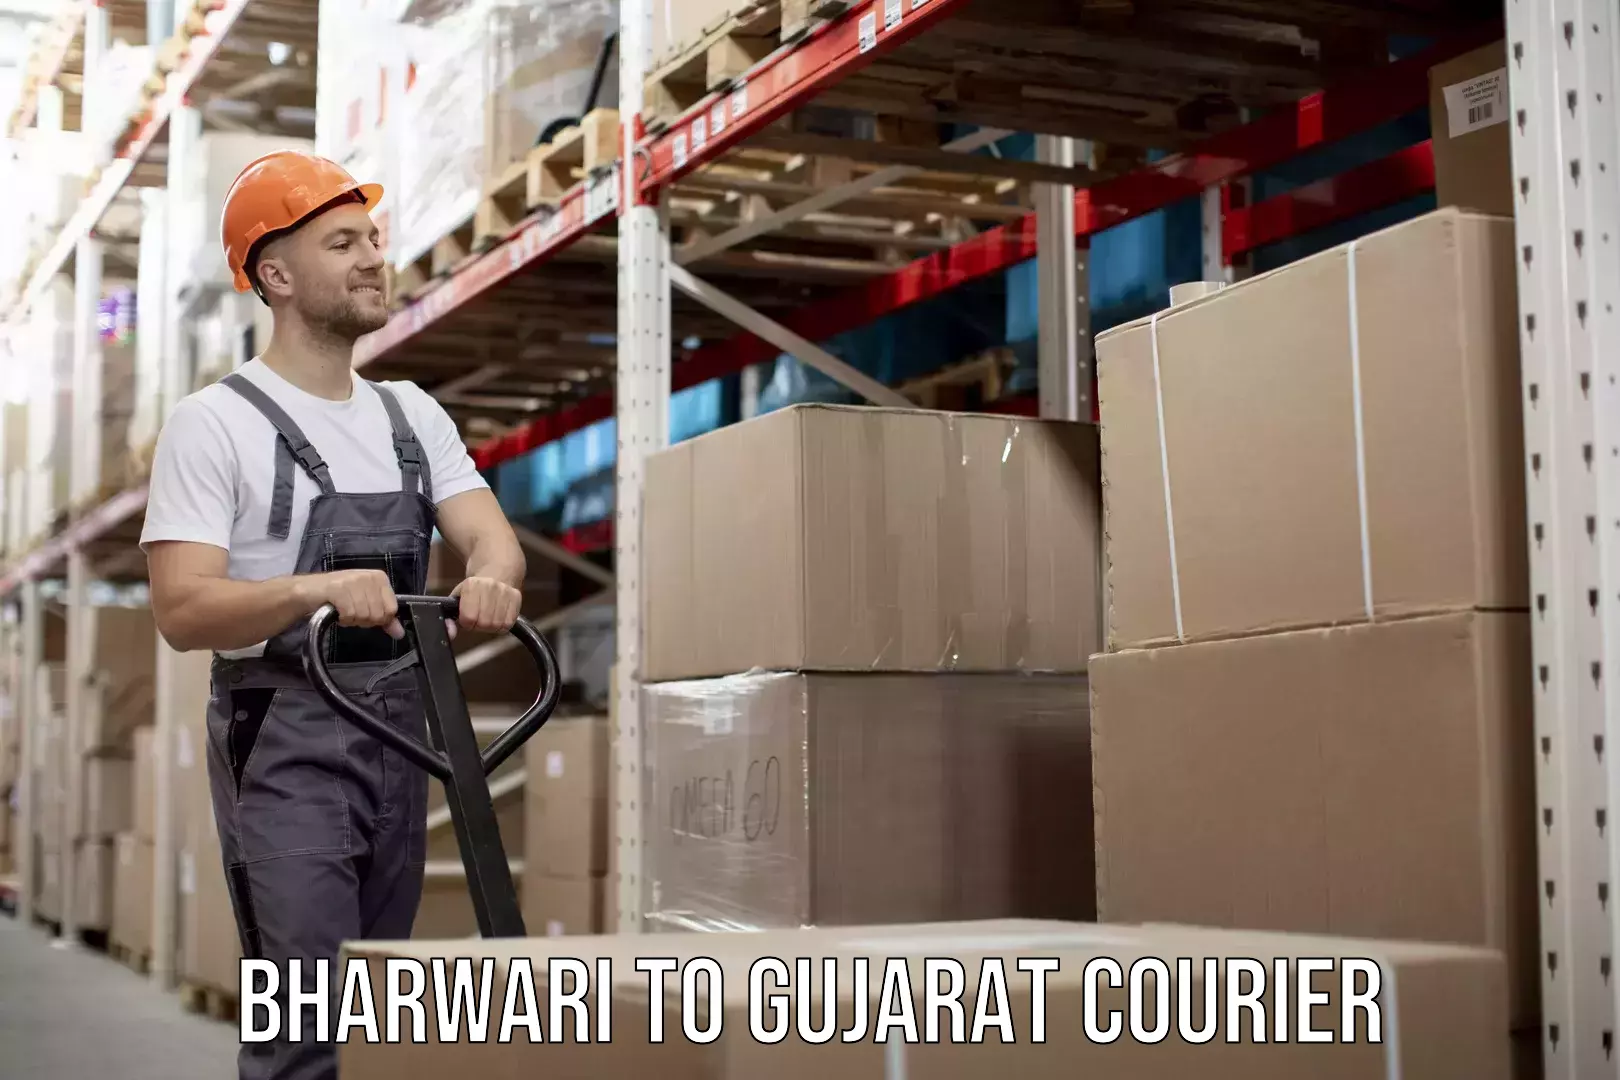 Express delivery network Bharwari to Gujarat